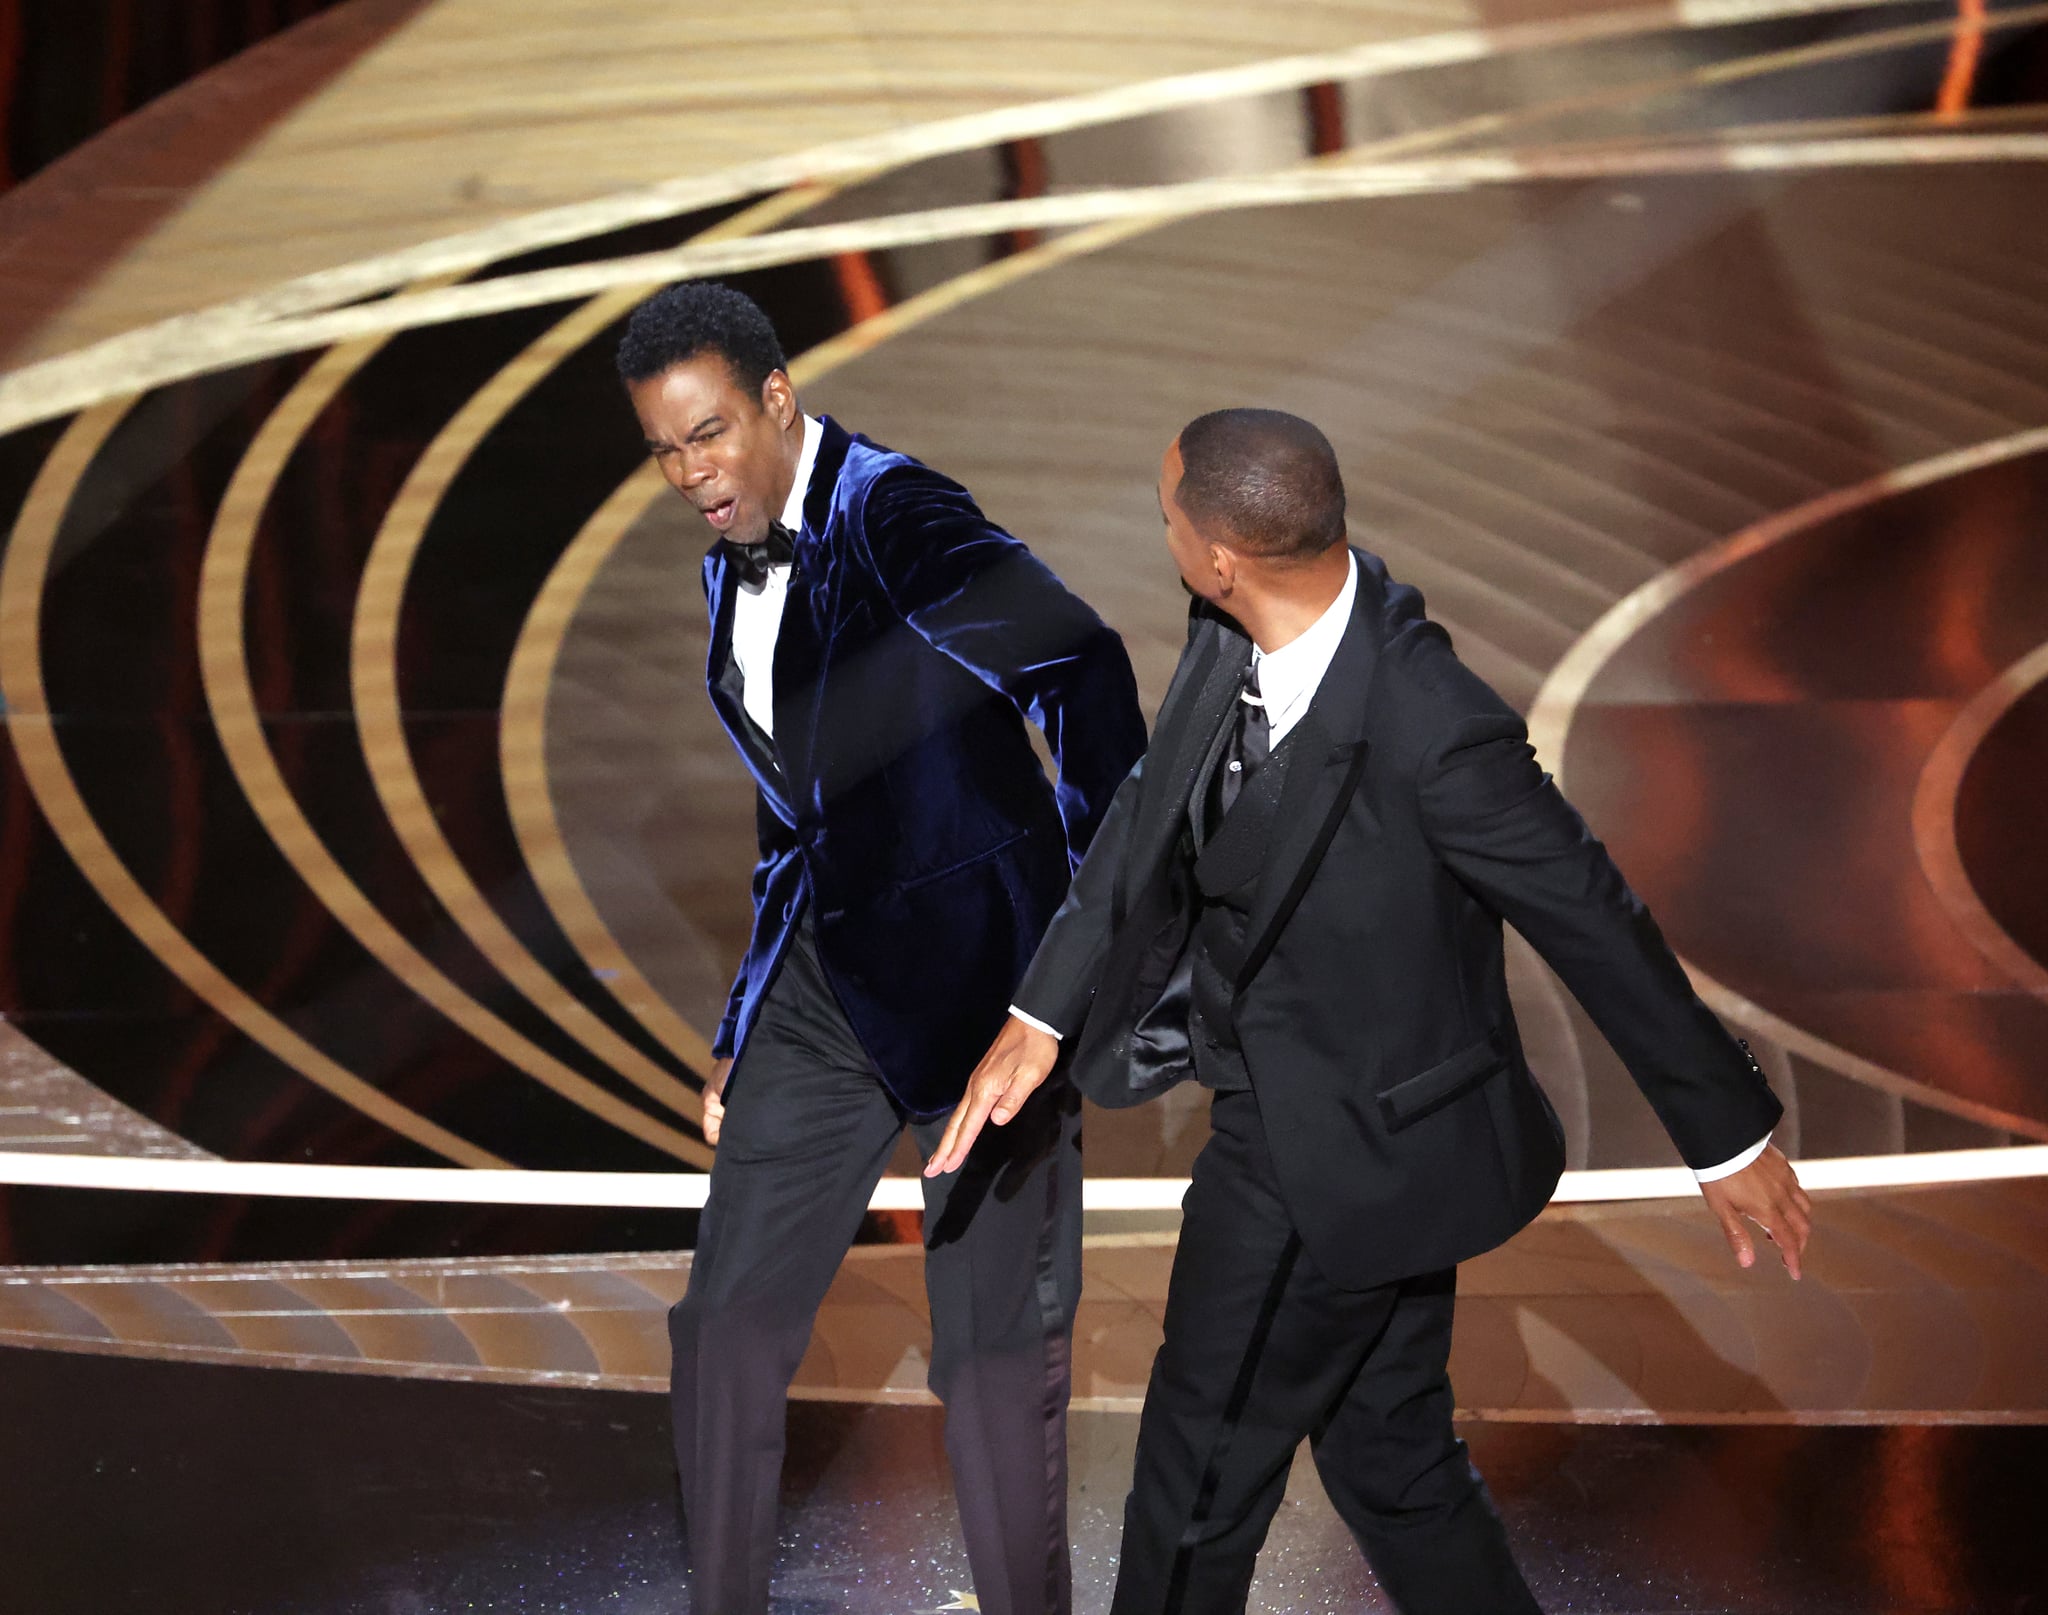 HOLLYWOOD, CA - March 27, 2022.    Will Smith slaps Chris Rock onstage during the show  at the 94th Academy Awards at the Dolby Theatre at Ovation Hollywood on Sunday, March 27, 2022.  (Myung Chun / Los Angeles Times via Getty Images)